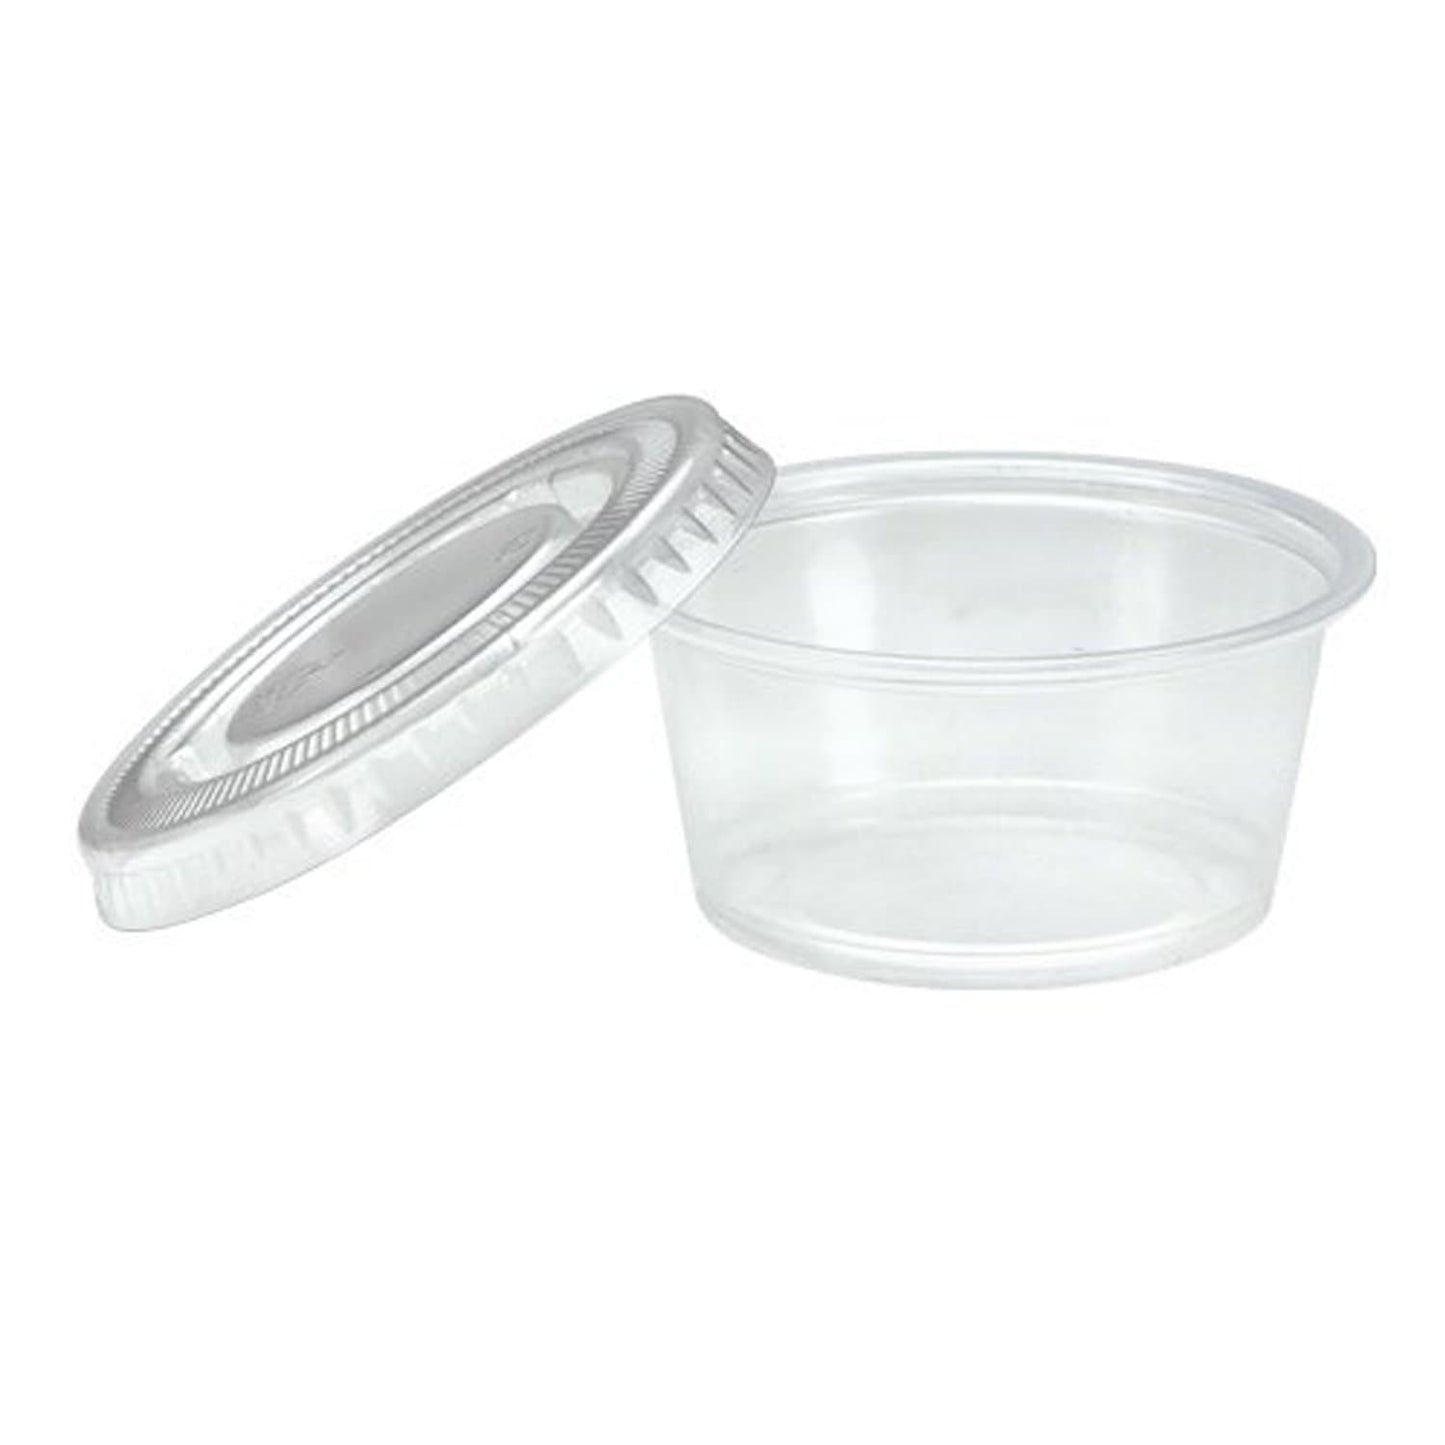 Norwex - Introducing our Silicone Cup Lids! These lids are perfect for  keeping your drinks and food hot. They work on glass, stainless steel,  plastic and even ceramic containers with smooth rims.